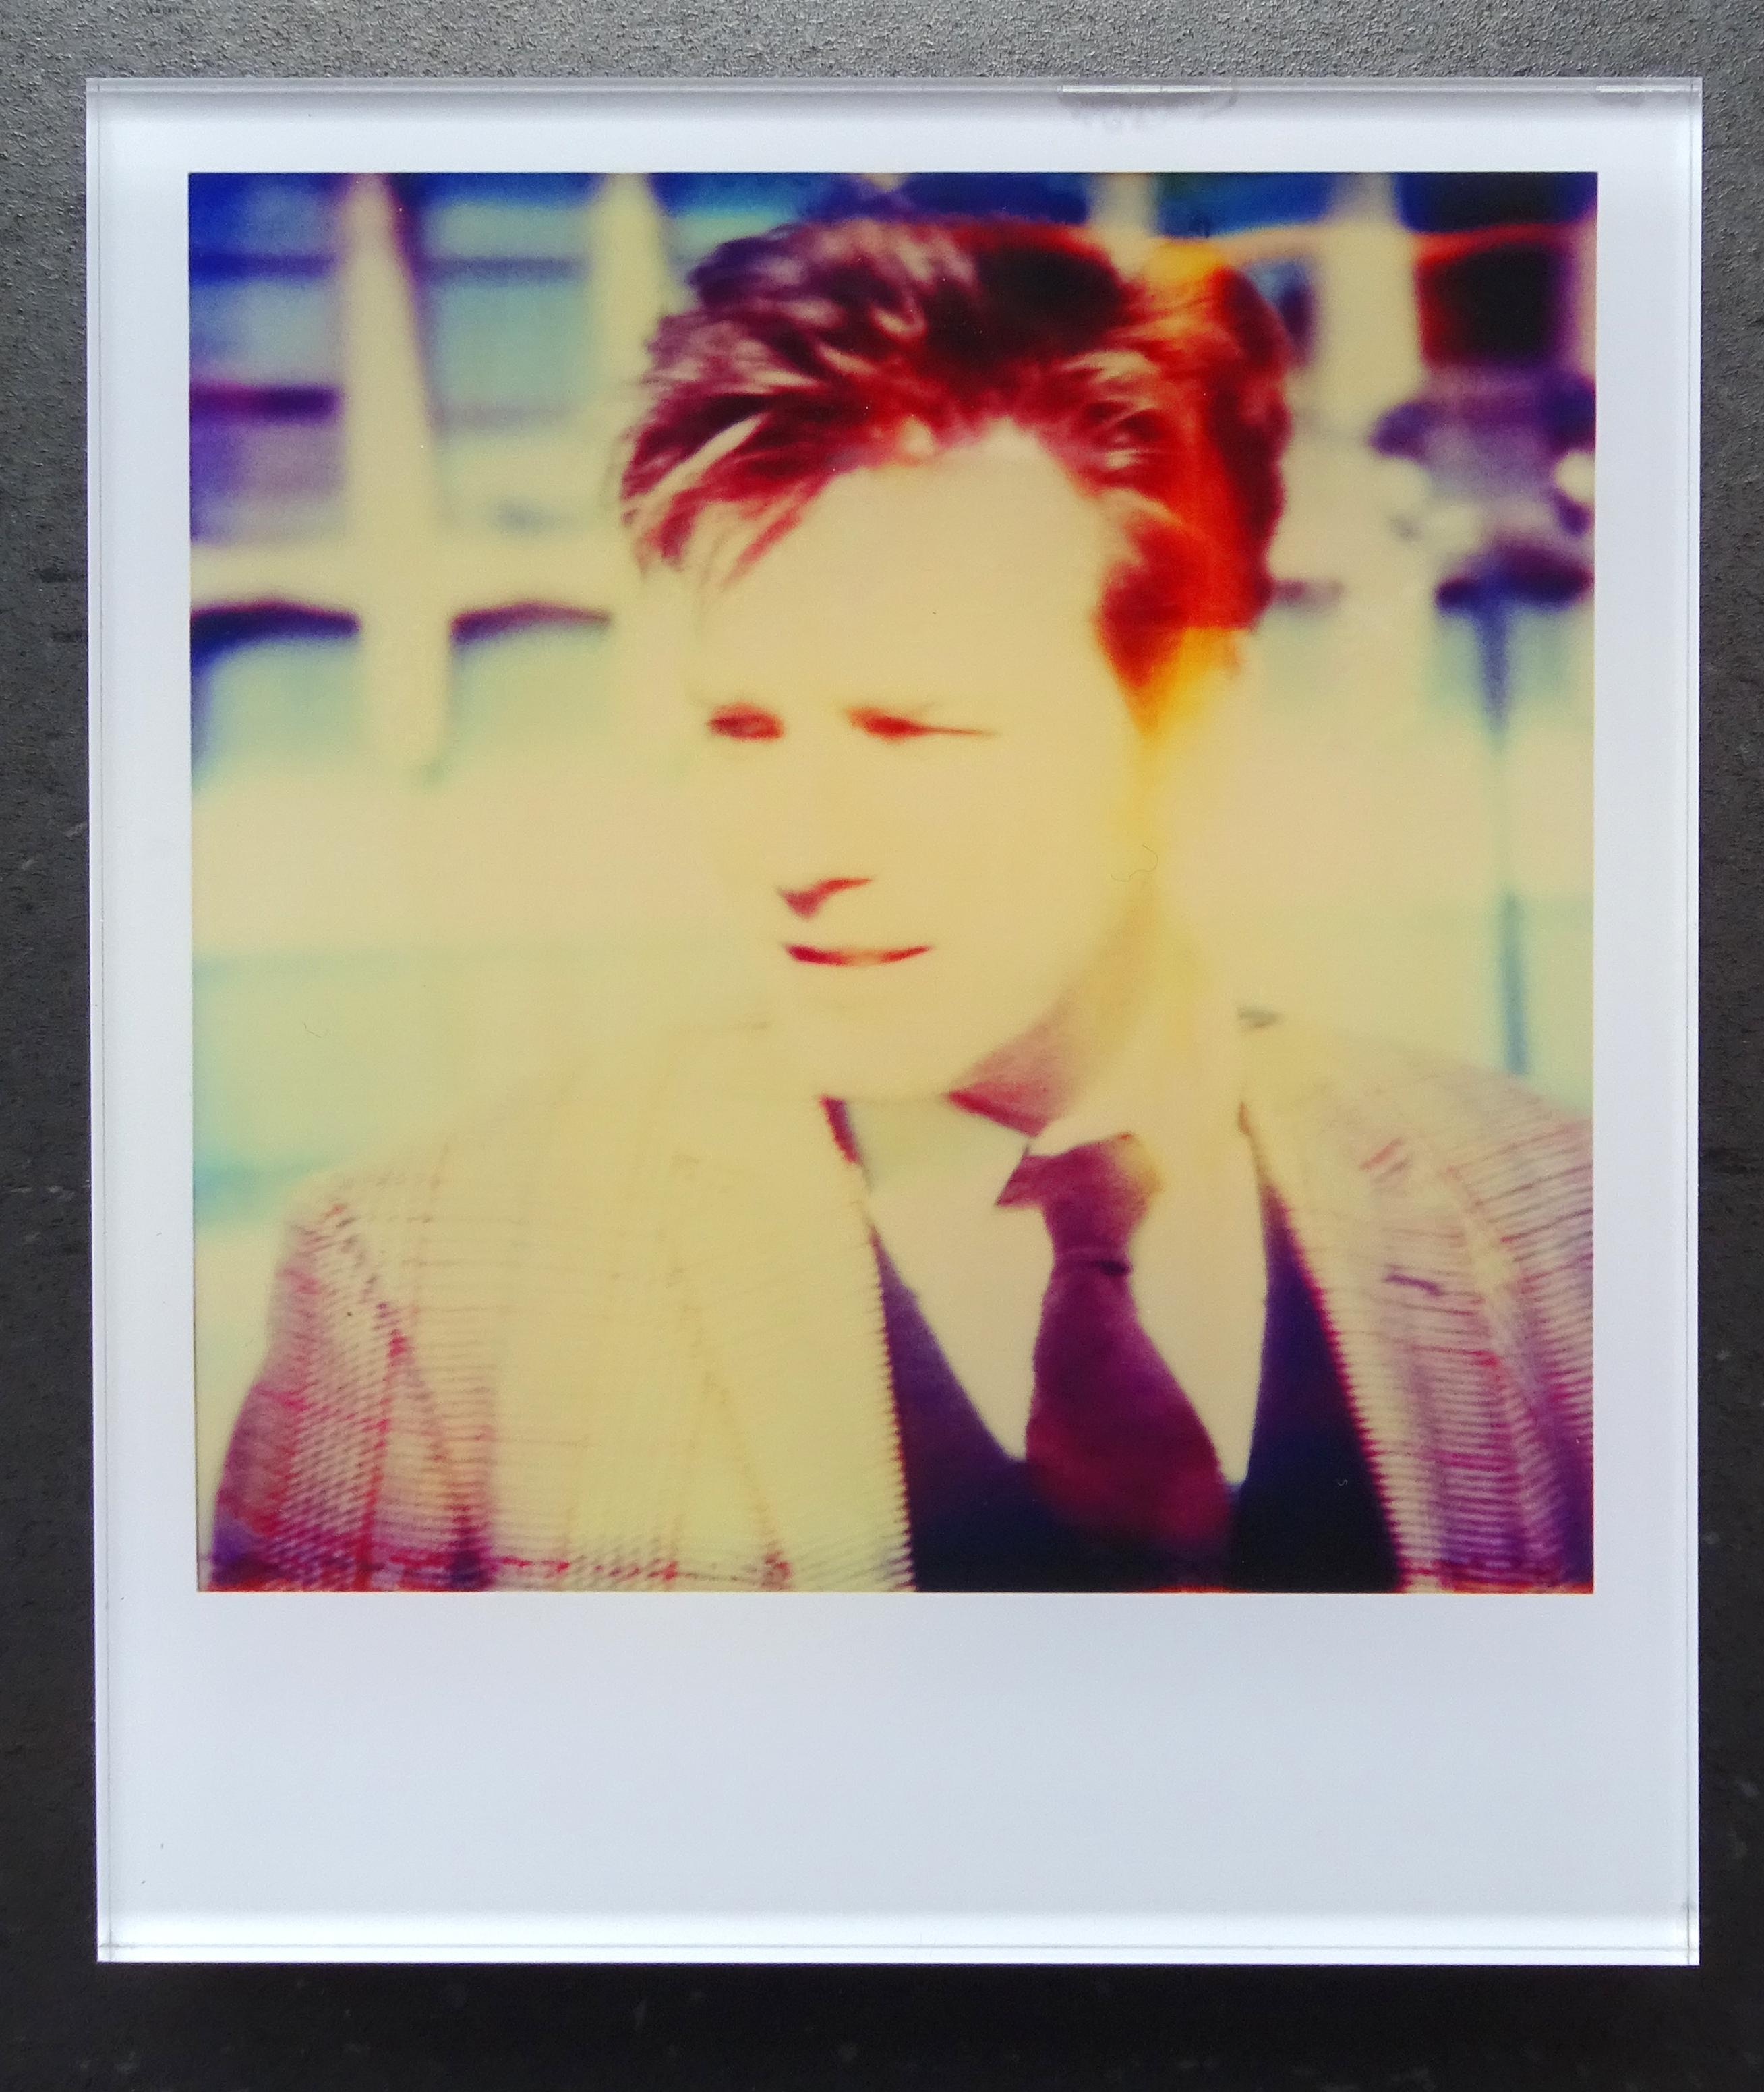 Stefanie Schneider's Minis
Sam (Stay), 2006
signed and signature brand on verso
Lambda digital Color Photographs based on a Polaroid

from the movie 'Stay' by Marc Forster, featuring Ewan McGregor and Naomi Watts.

Polaroid sized open Editions